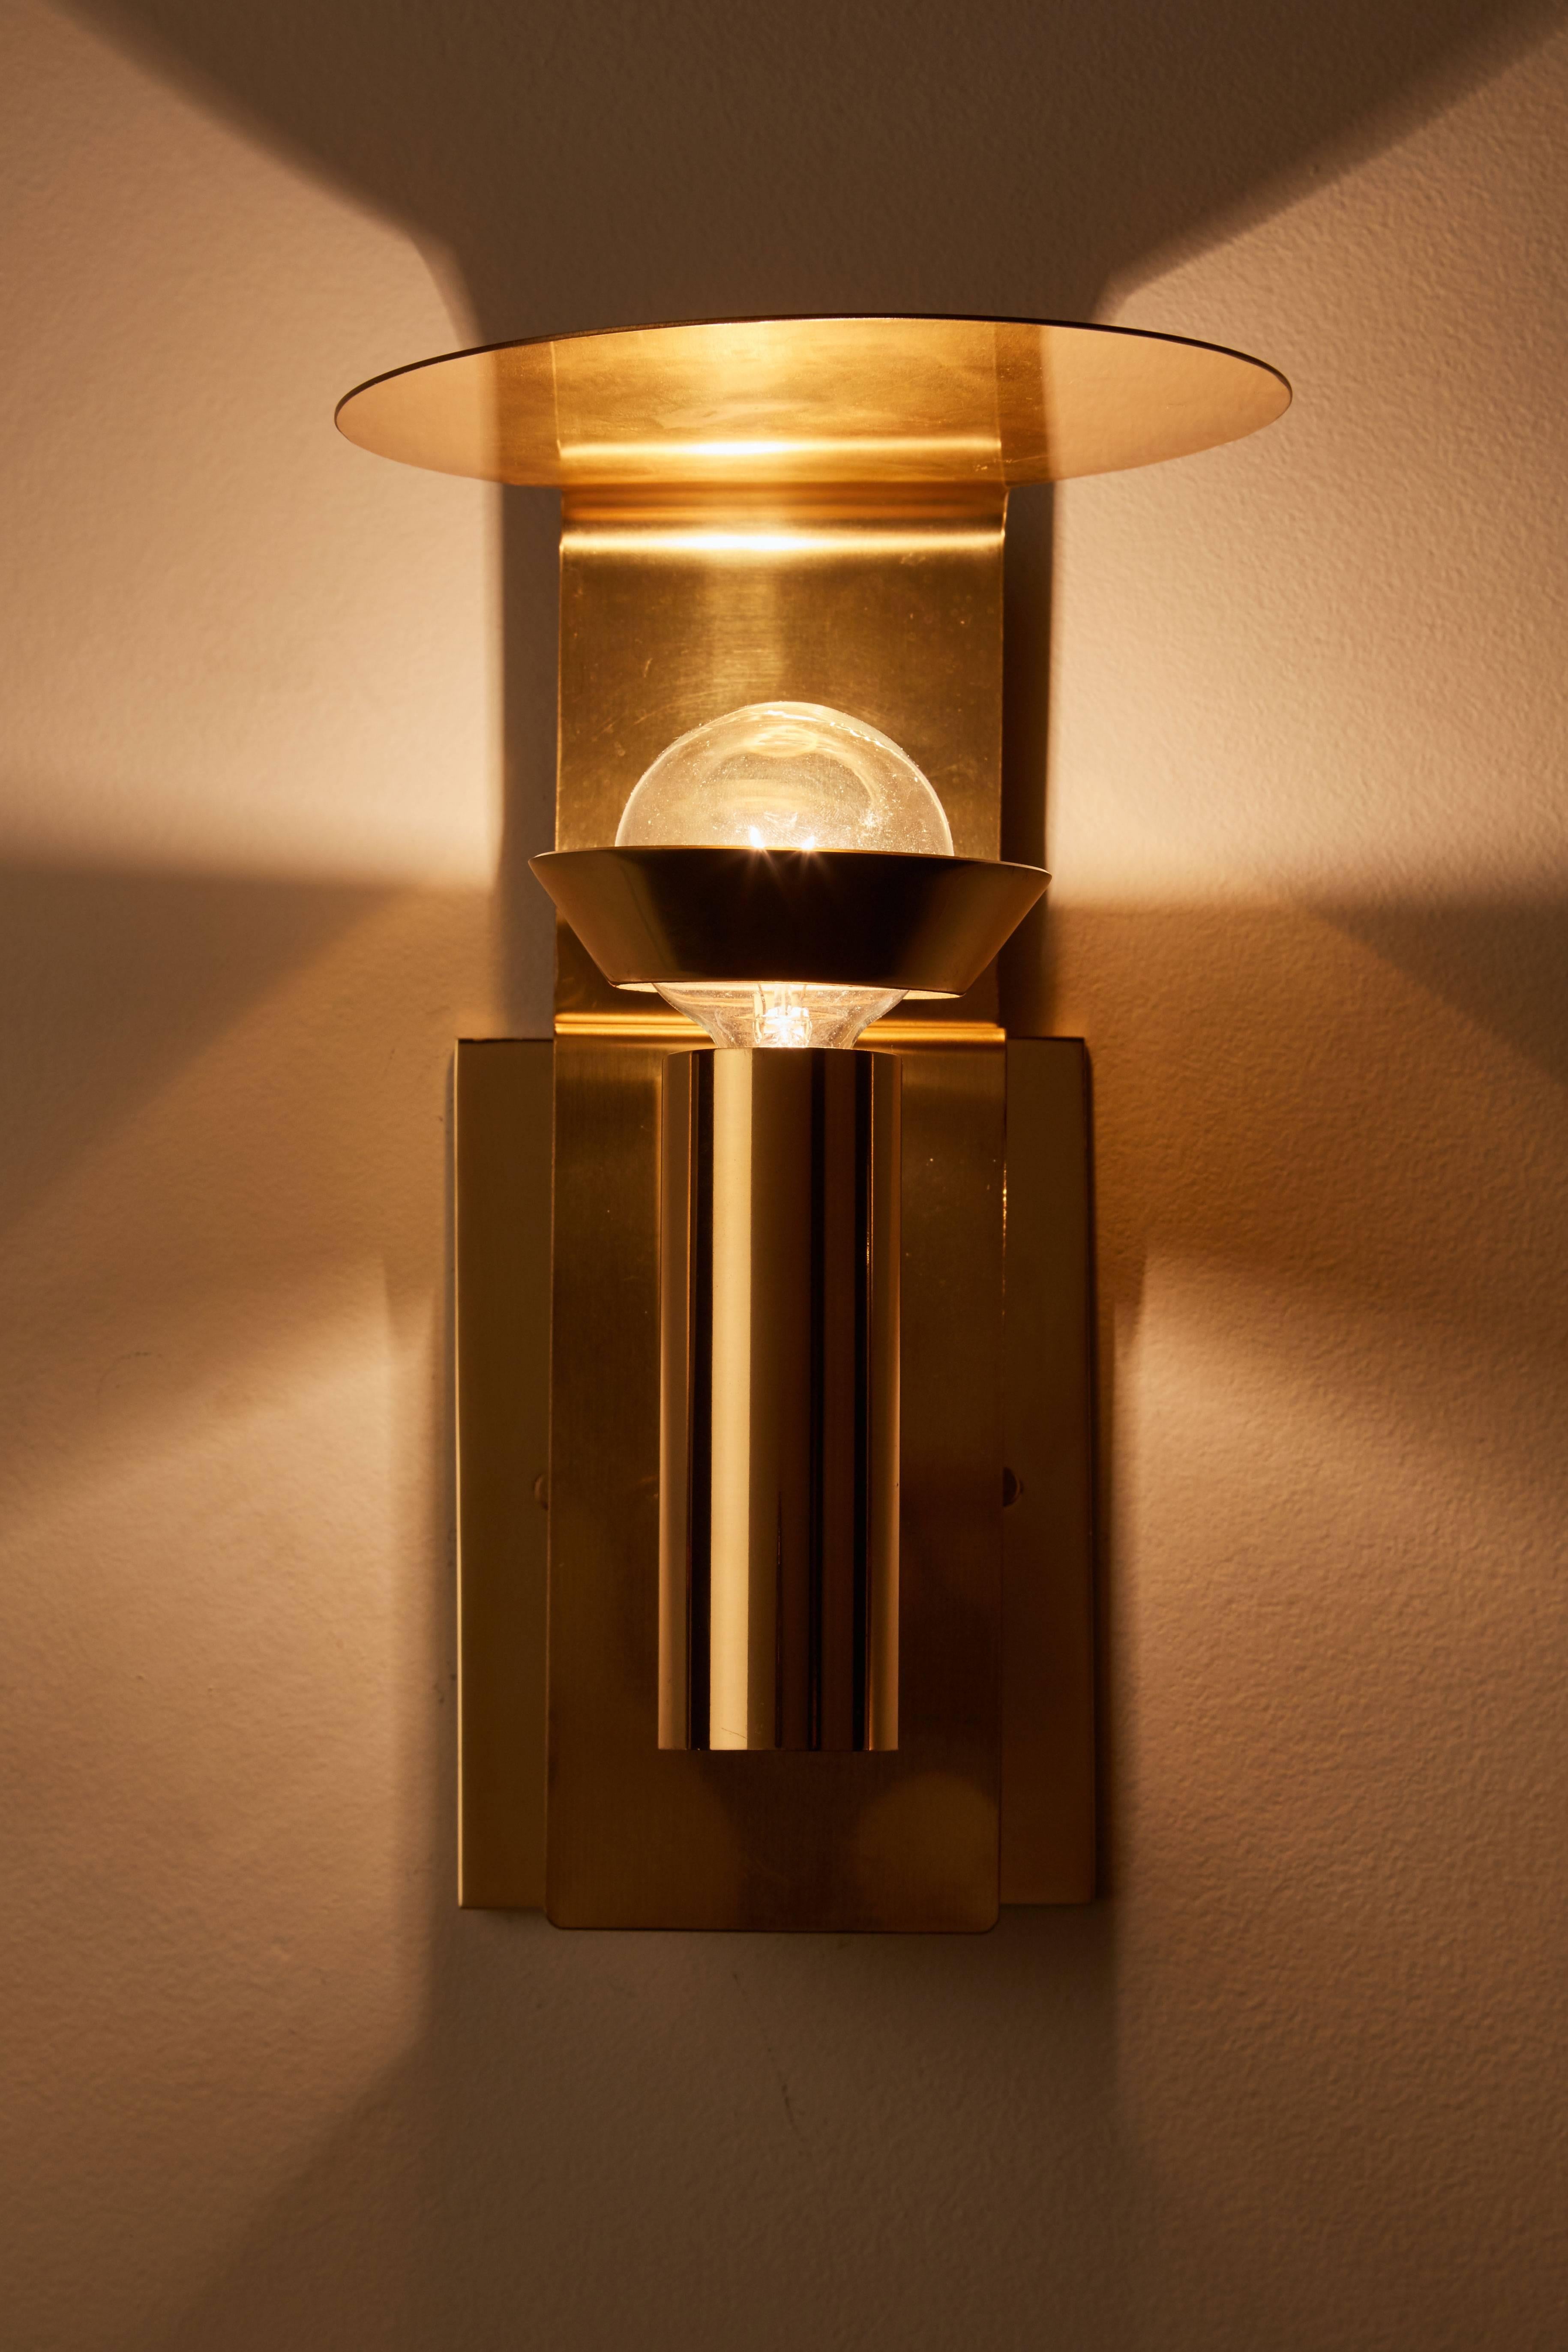 Four brass sconces manufactured by Focus Design in Sweden, circa 1960s. Wired for US junction boxes. Each sconce takes one E27 75w maximum bulb.